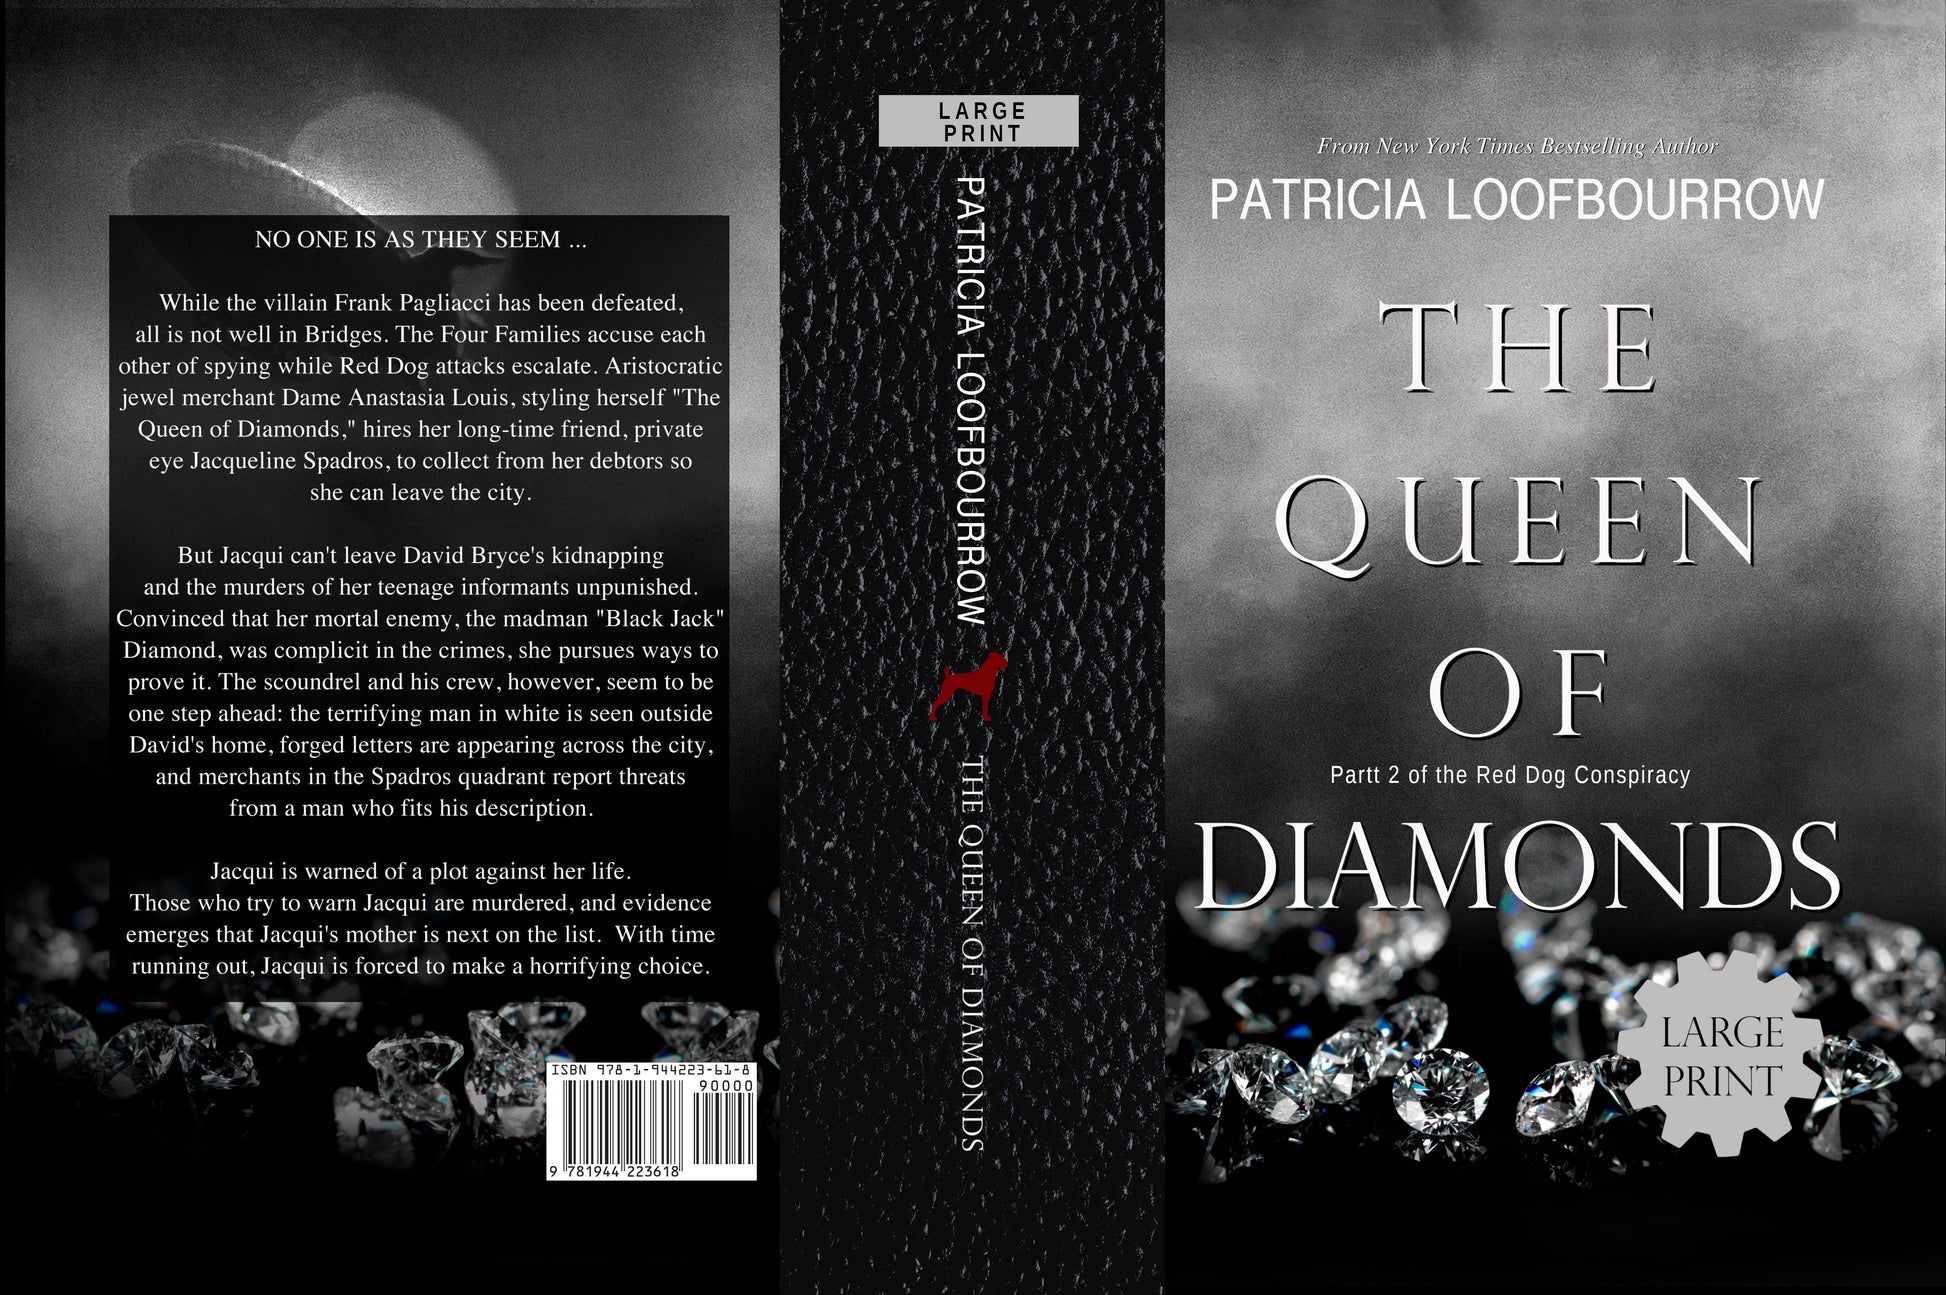 [PREORDER][LARGE PRINT] The Queen of Diamonds [Signed hardcover] - Patricia Loofbourrow